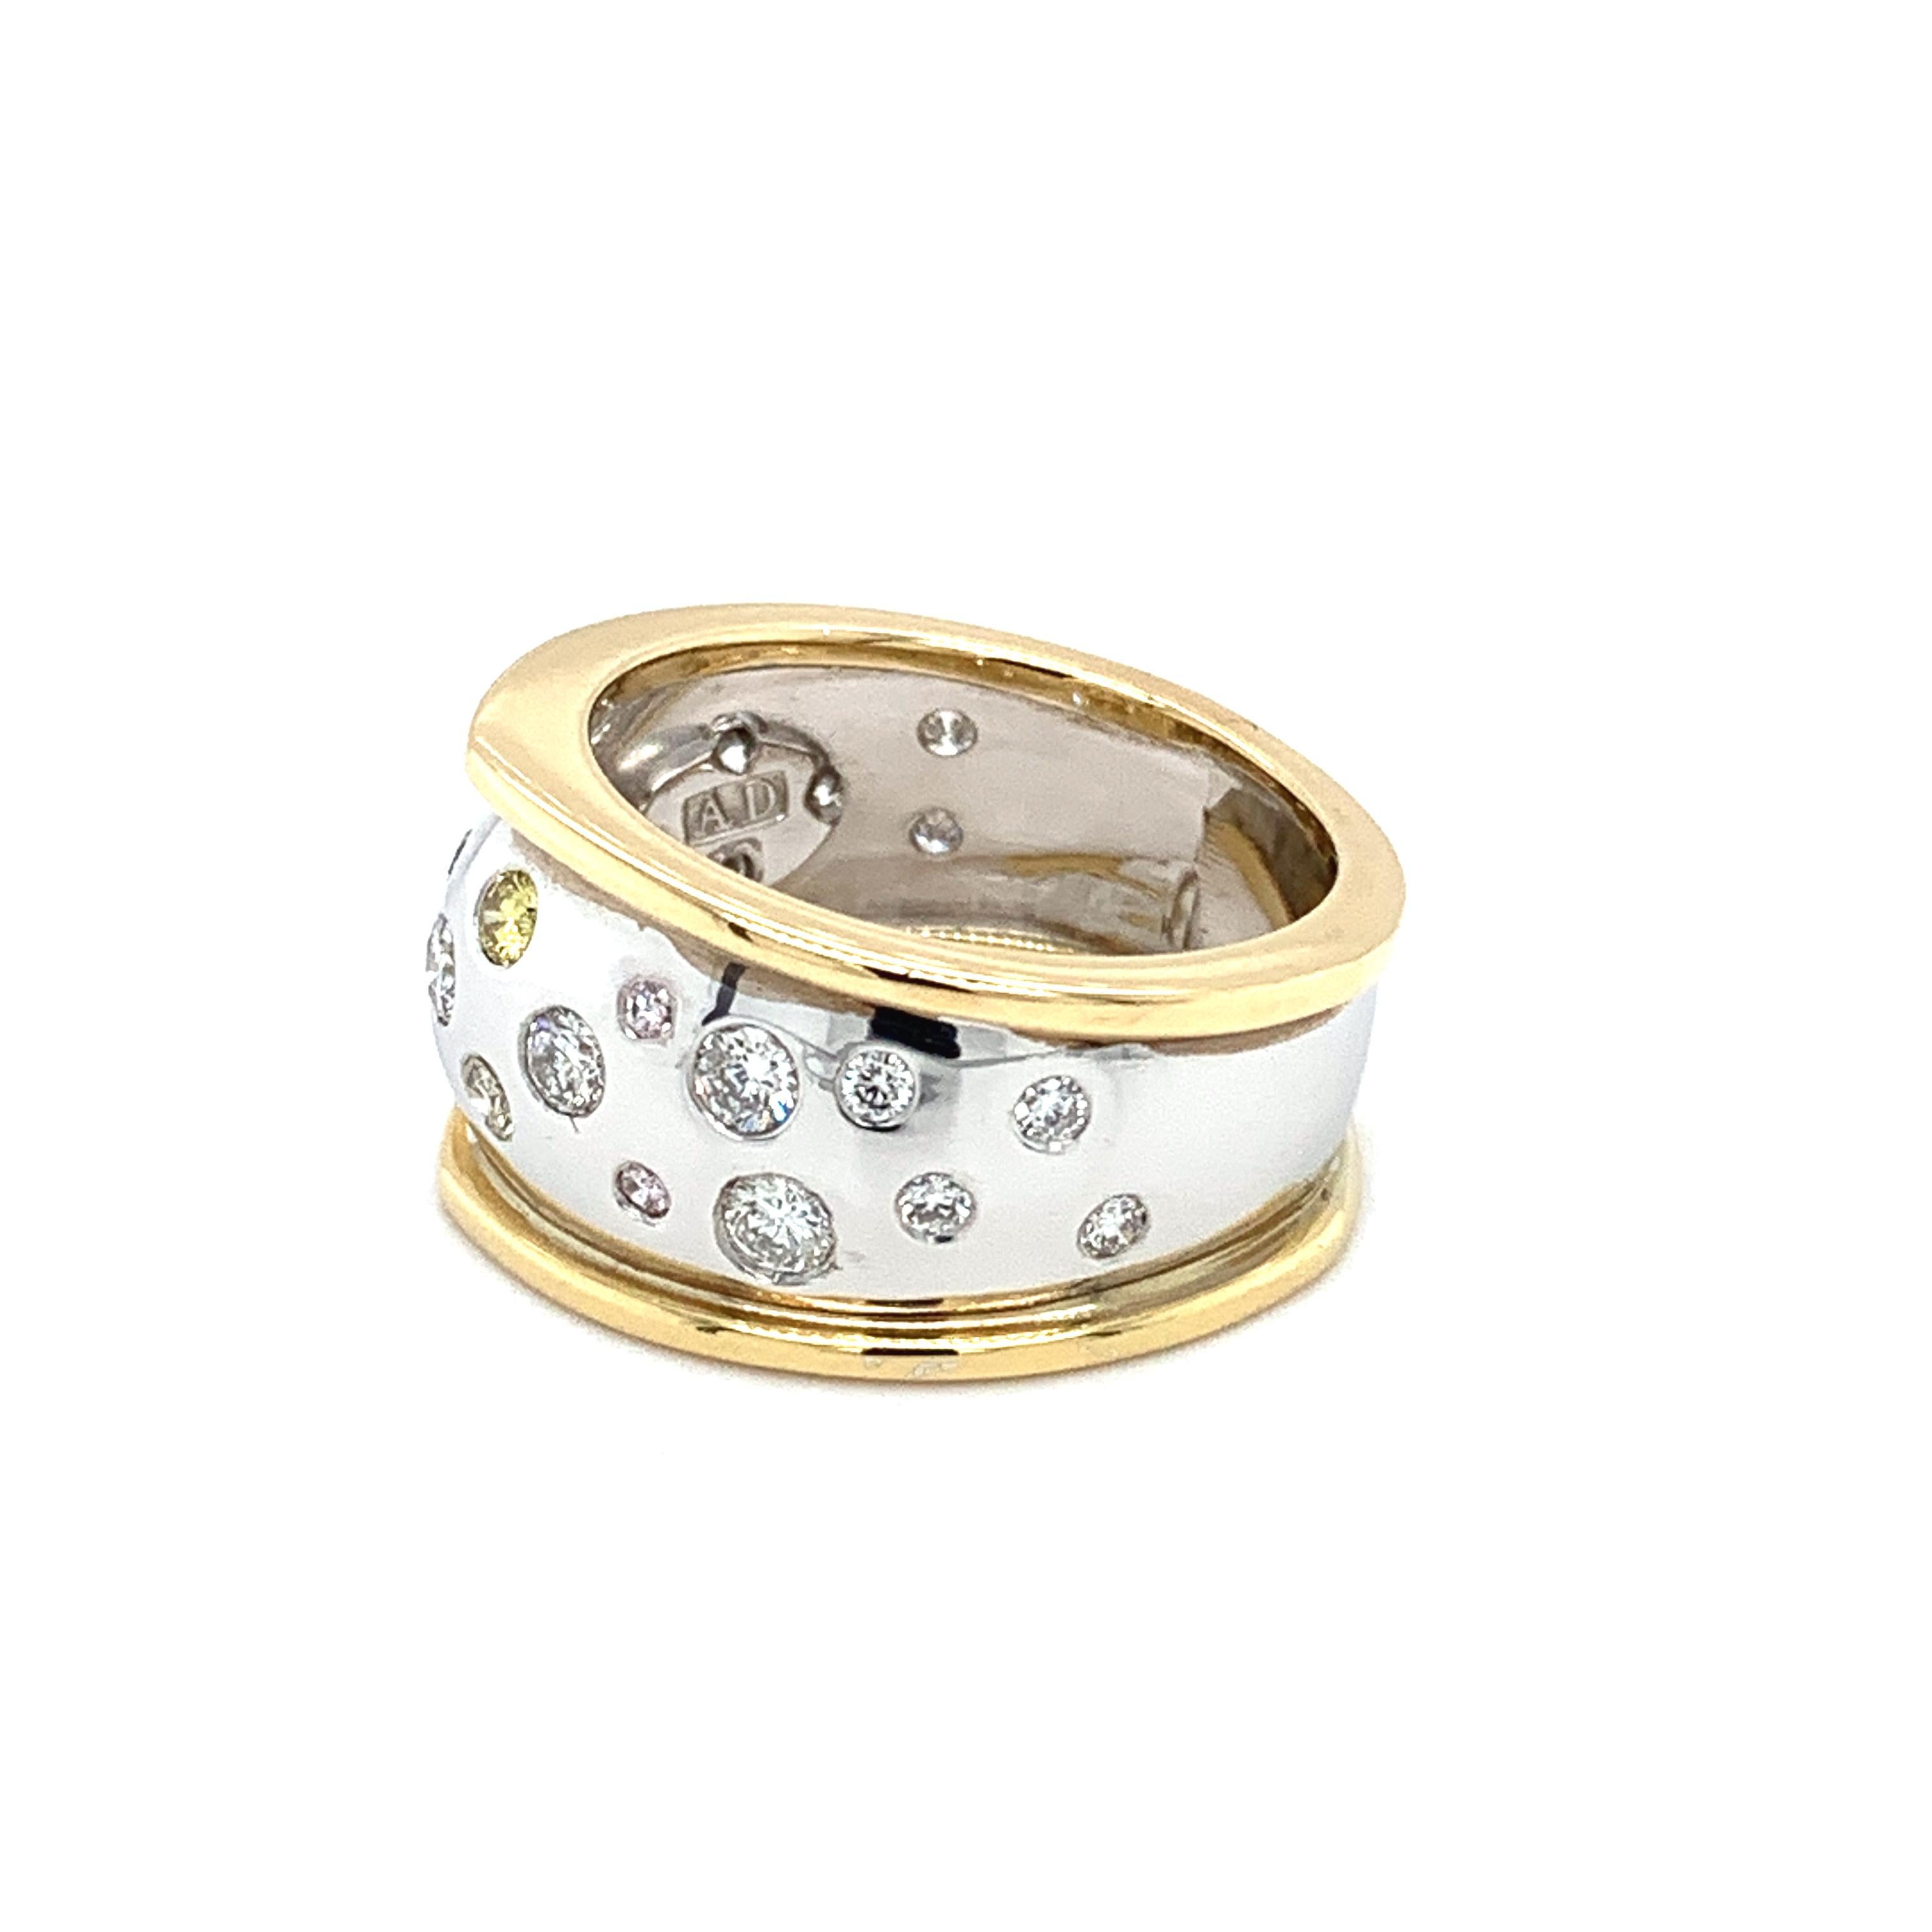 Art deco cocktail ring with mix diamonds in 18k white and yellow gold.
Composed of fancy yellow, pink, champagne, brown and white diamonds all mounted in 18k yellow and white gold large cocktail ring.
The ring hallmarked.
All diamond various sizes